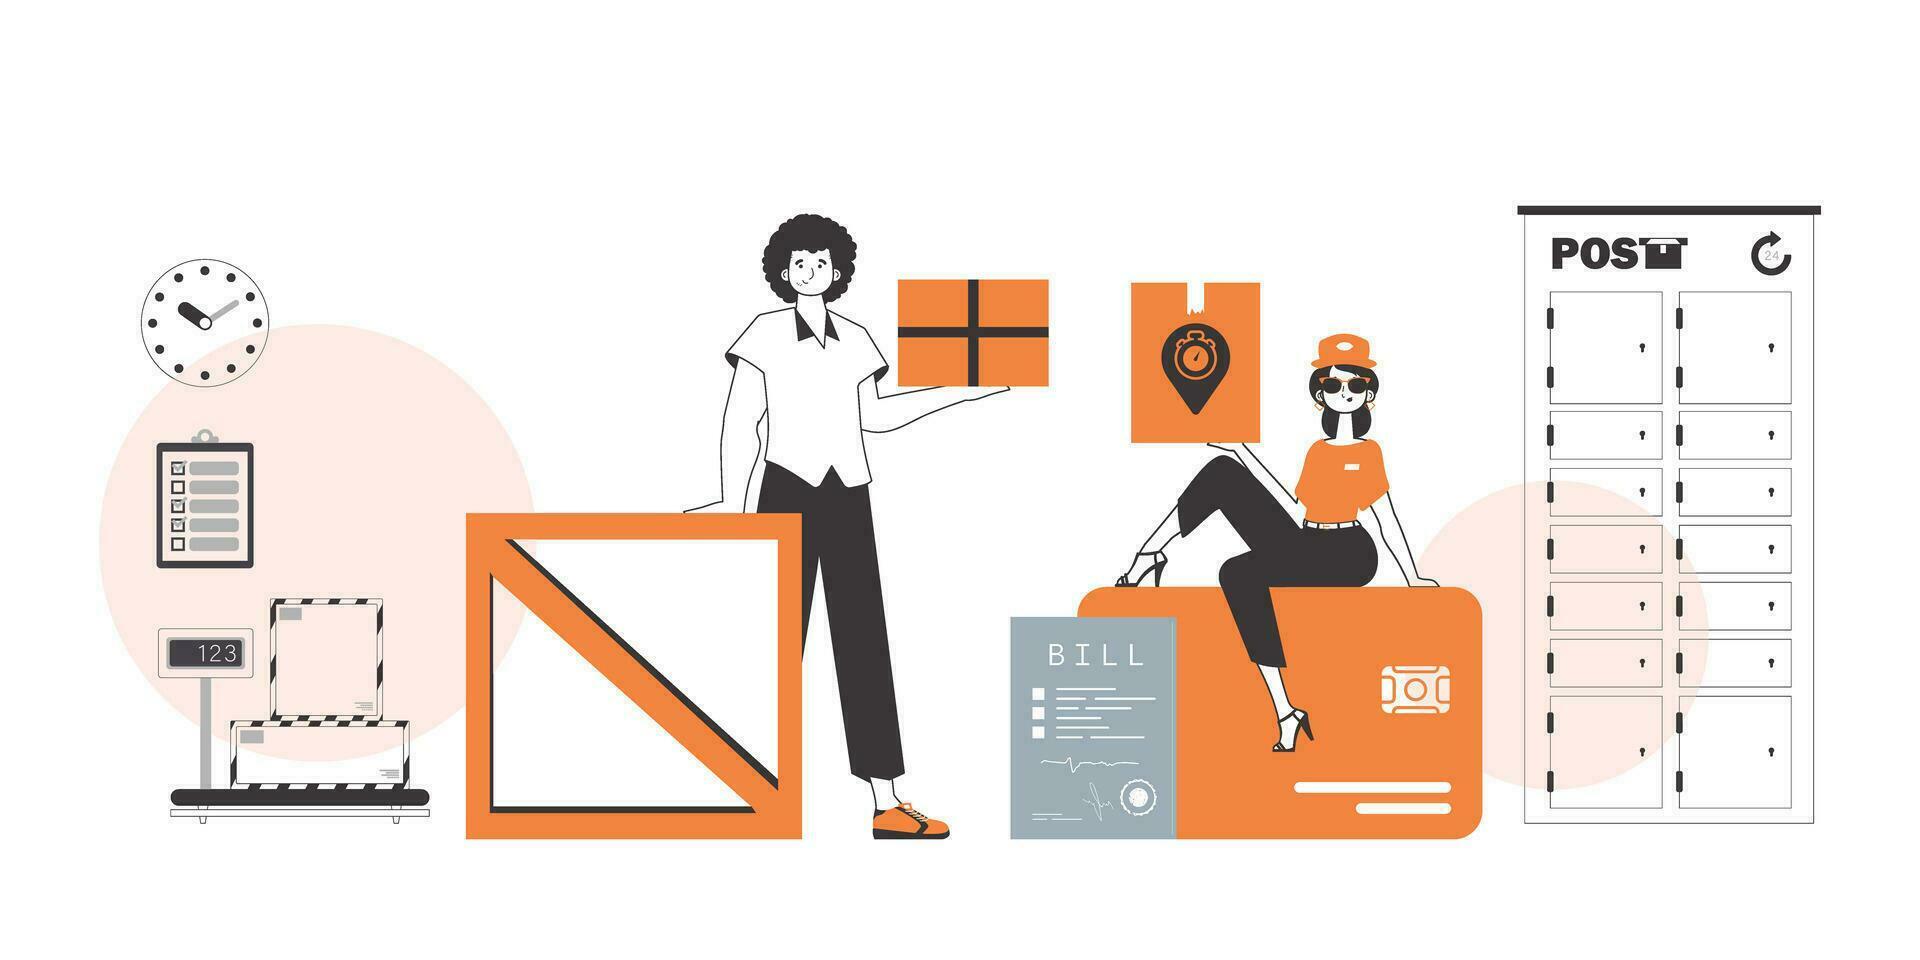 Girl and guy delivers parcels. Linear style. vector